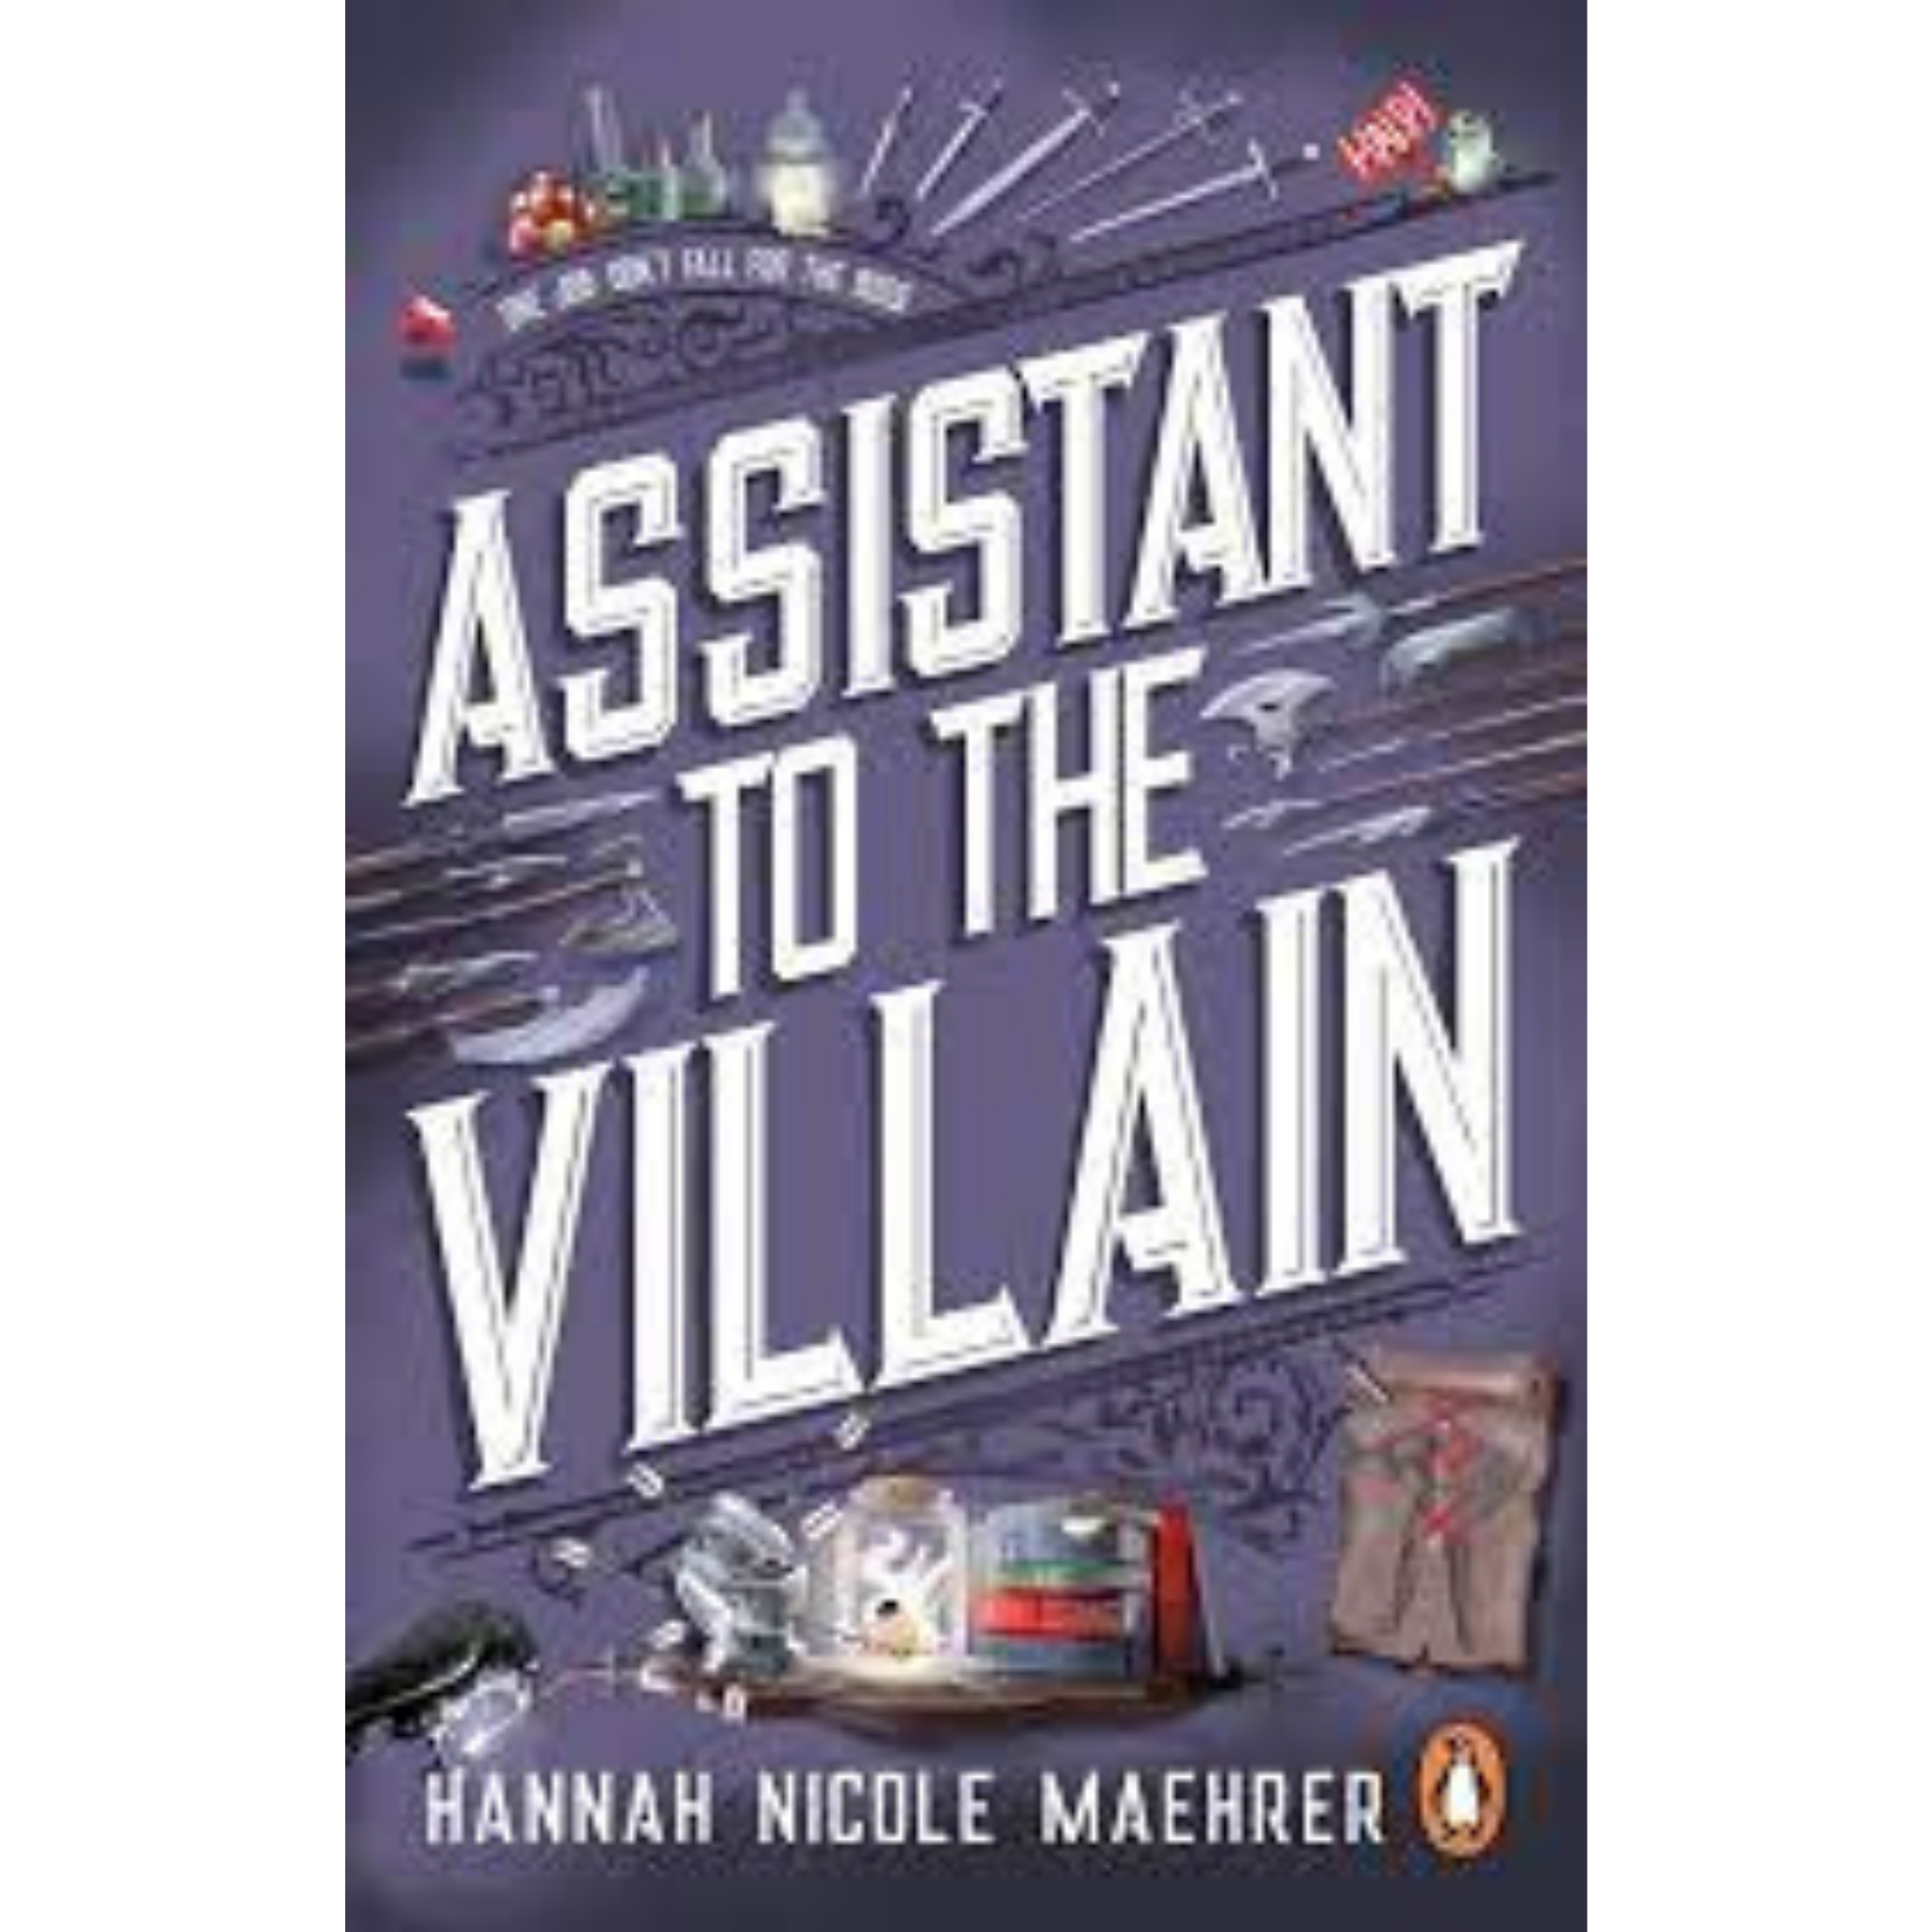 Assistant to the vilian By Hannah Nicole